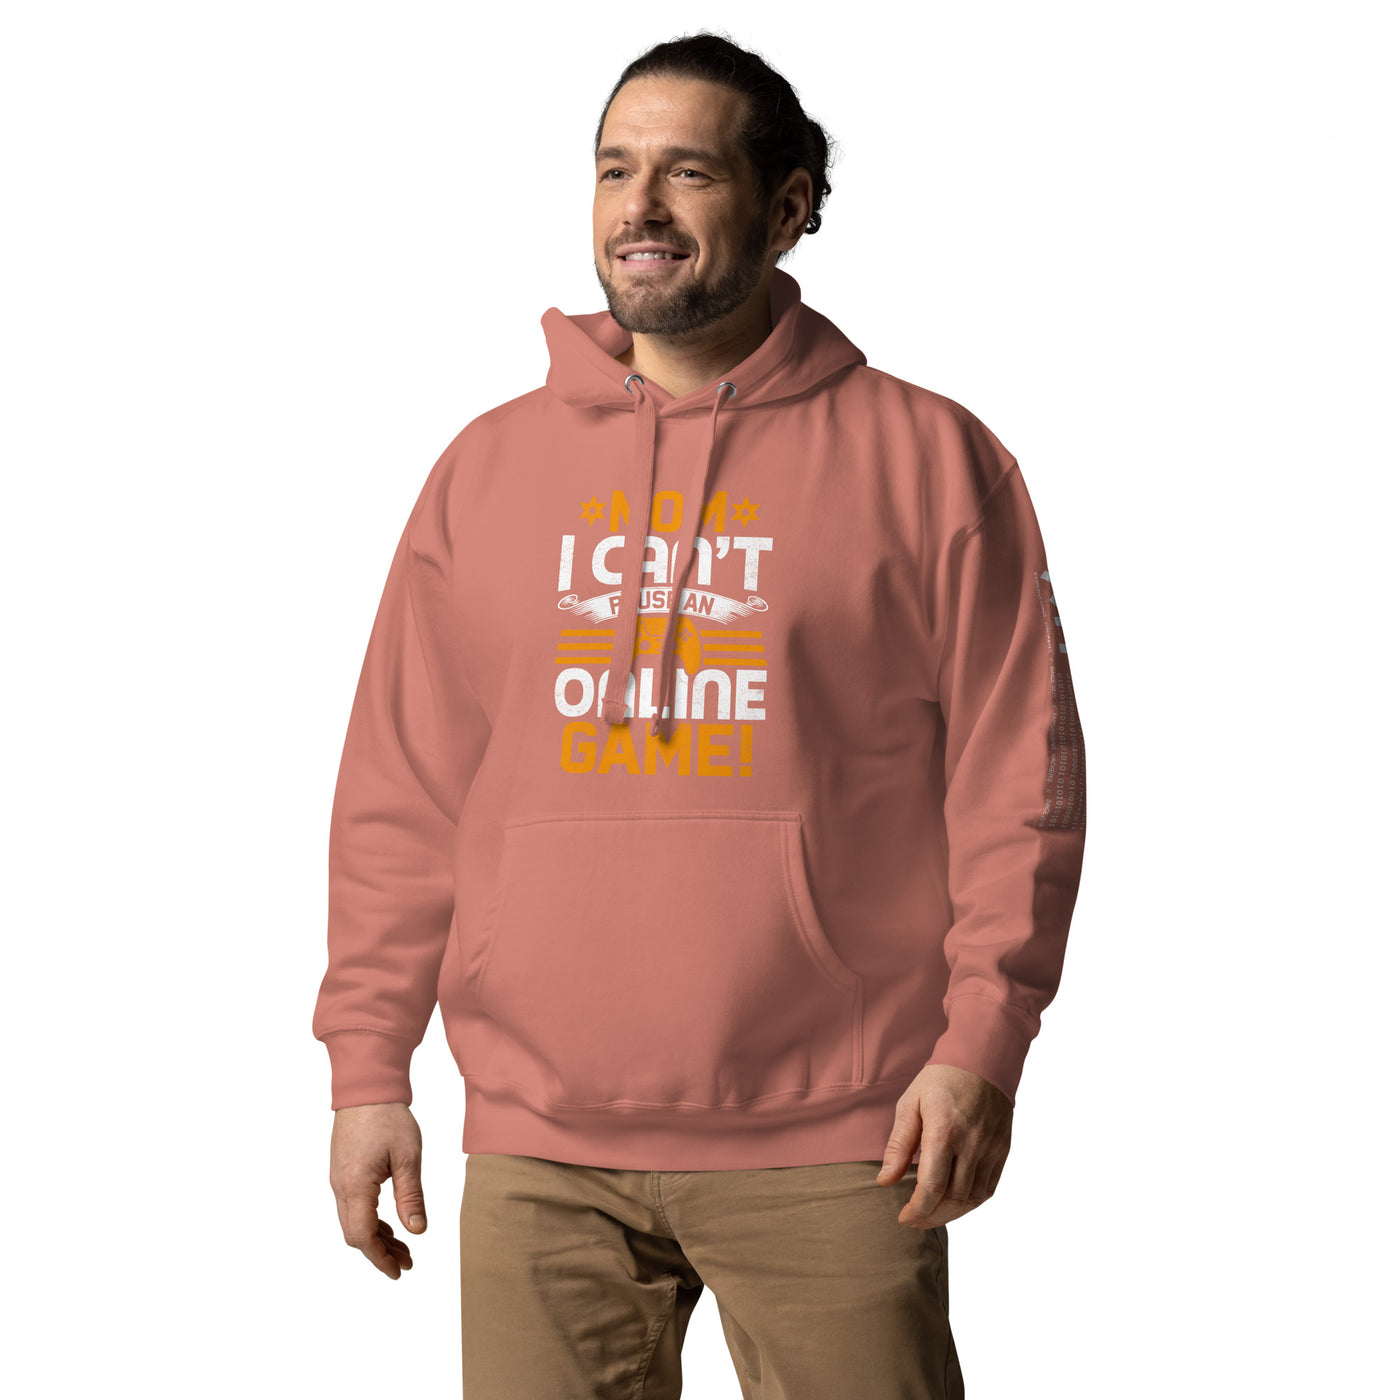 *MOM*! I can't Pause an Online Game - Unisex Hoodie